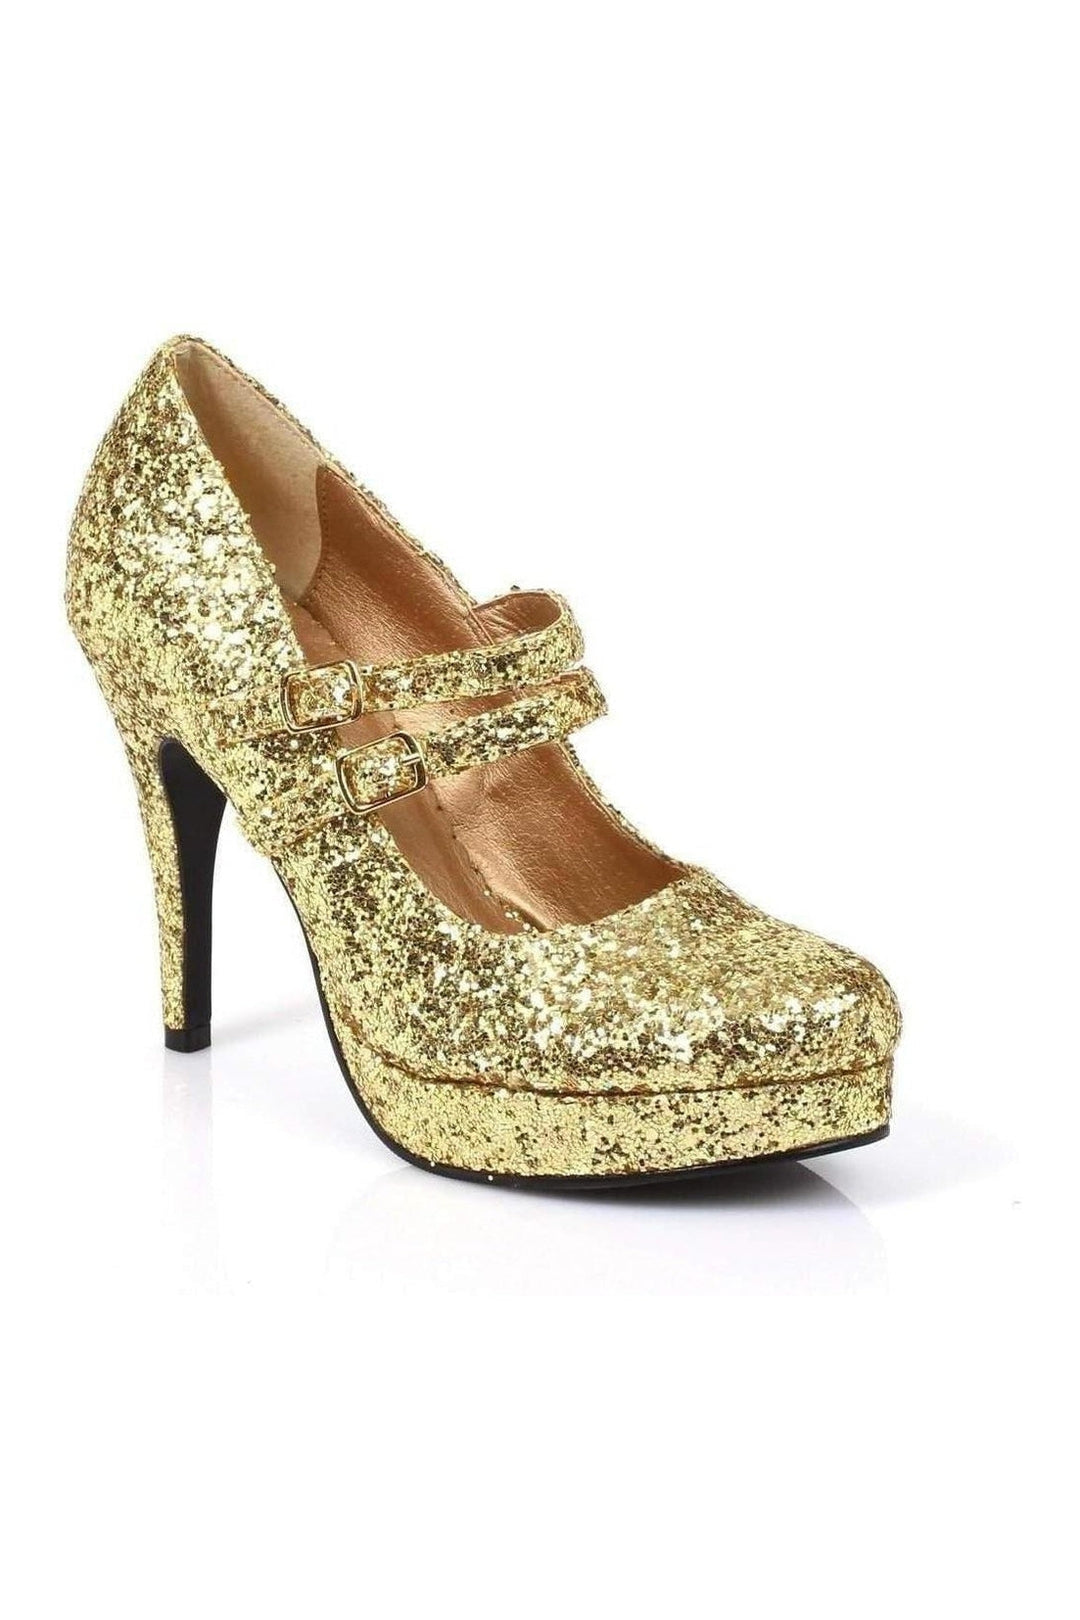 421-JANE-G Mary Jane | Gold Glitter-Ellie Shoes-Gold-Mary Janes-SEXYSHOES.COM